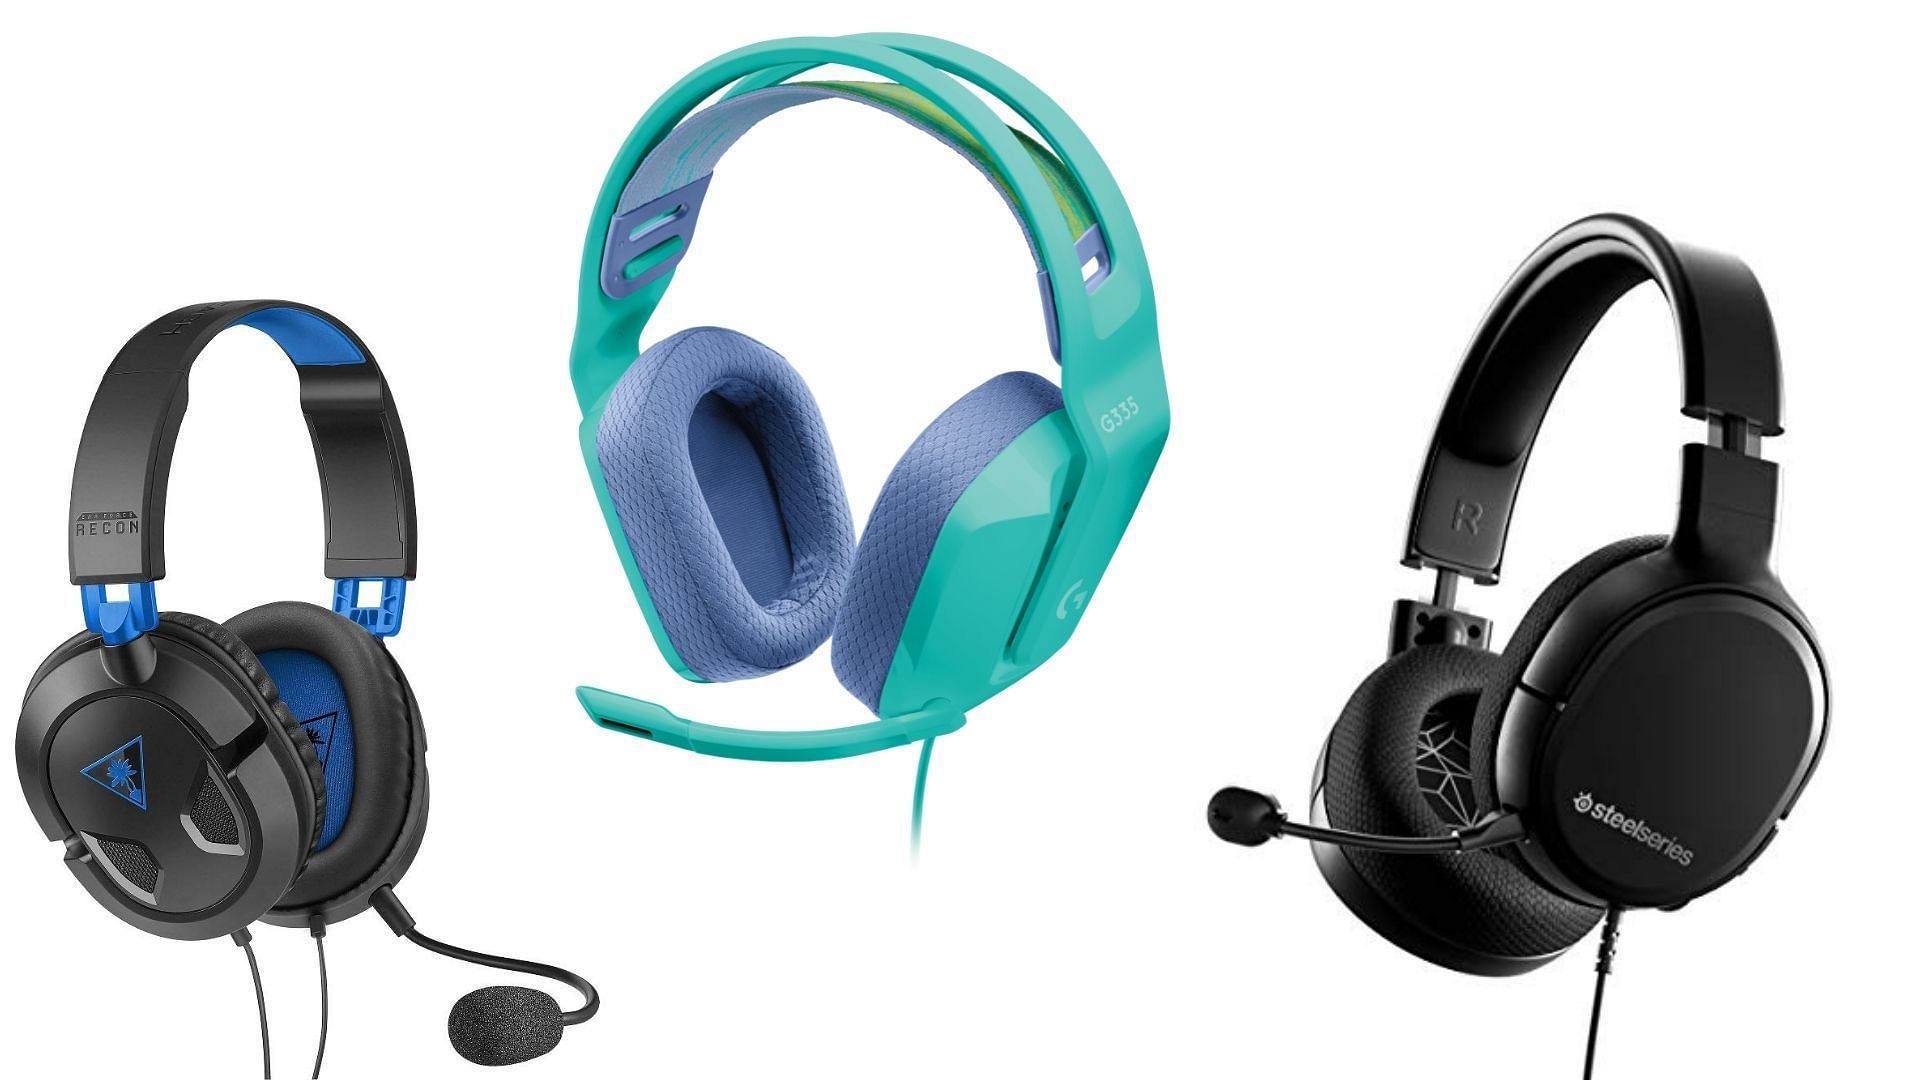 Budget headsets pack quite a punch (Image via Sportskeeda)